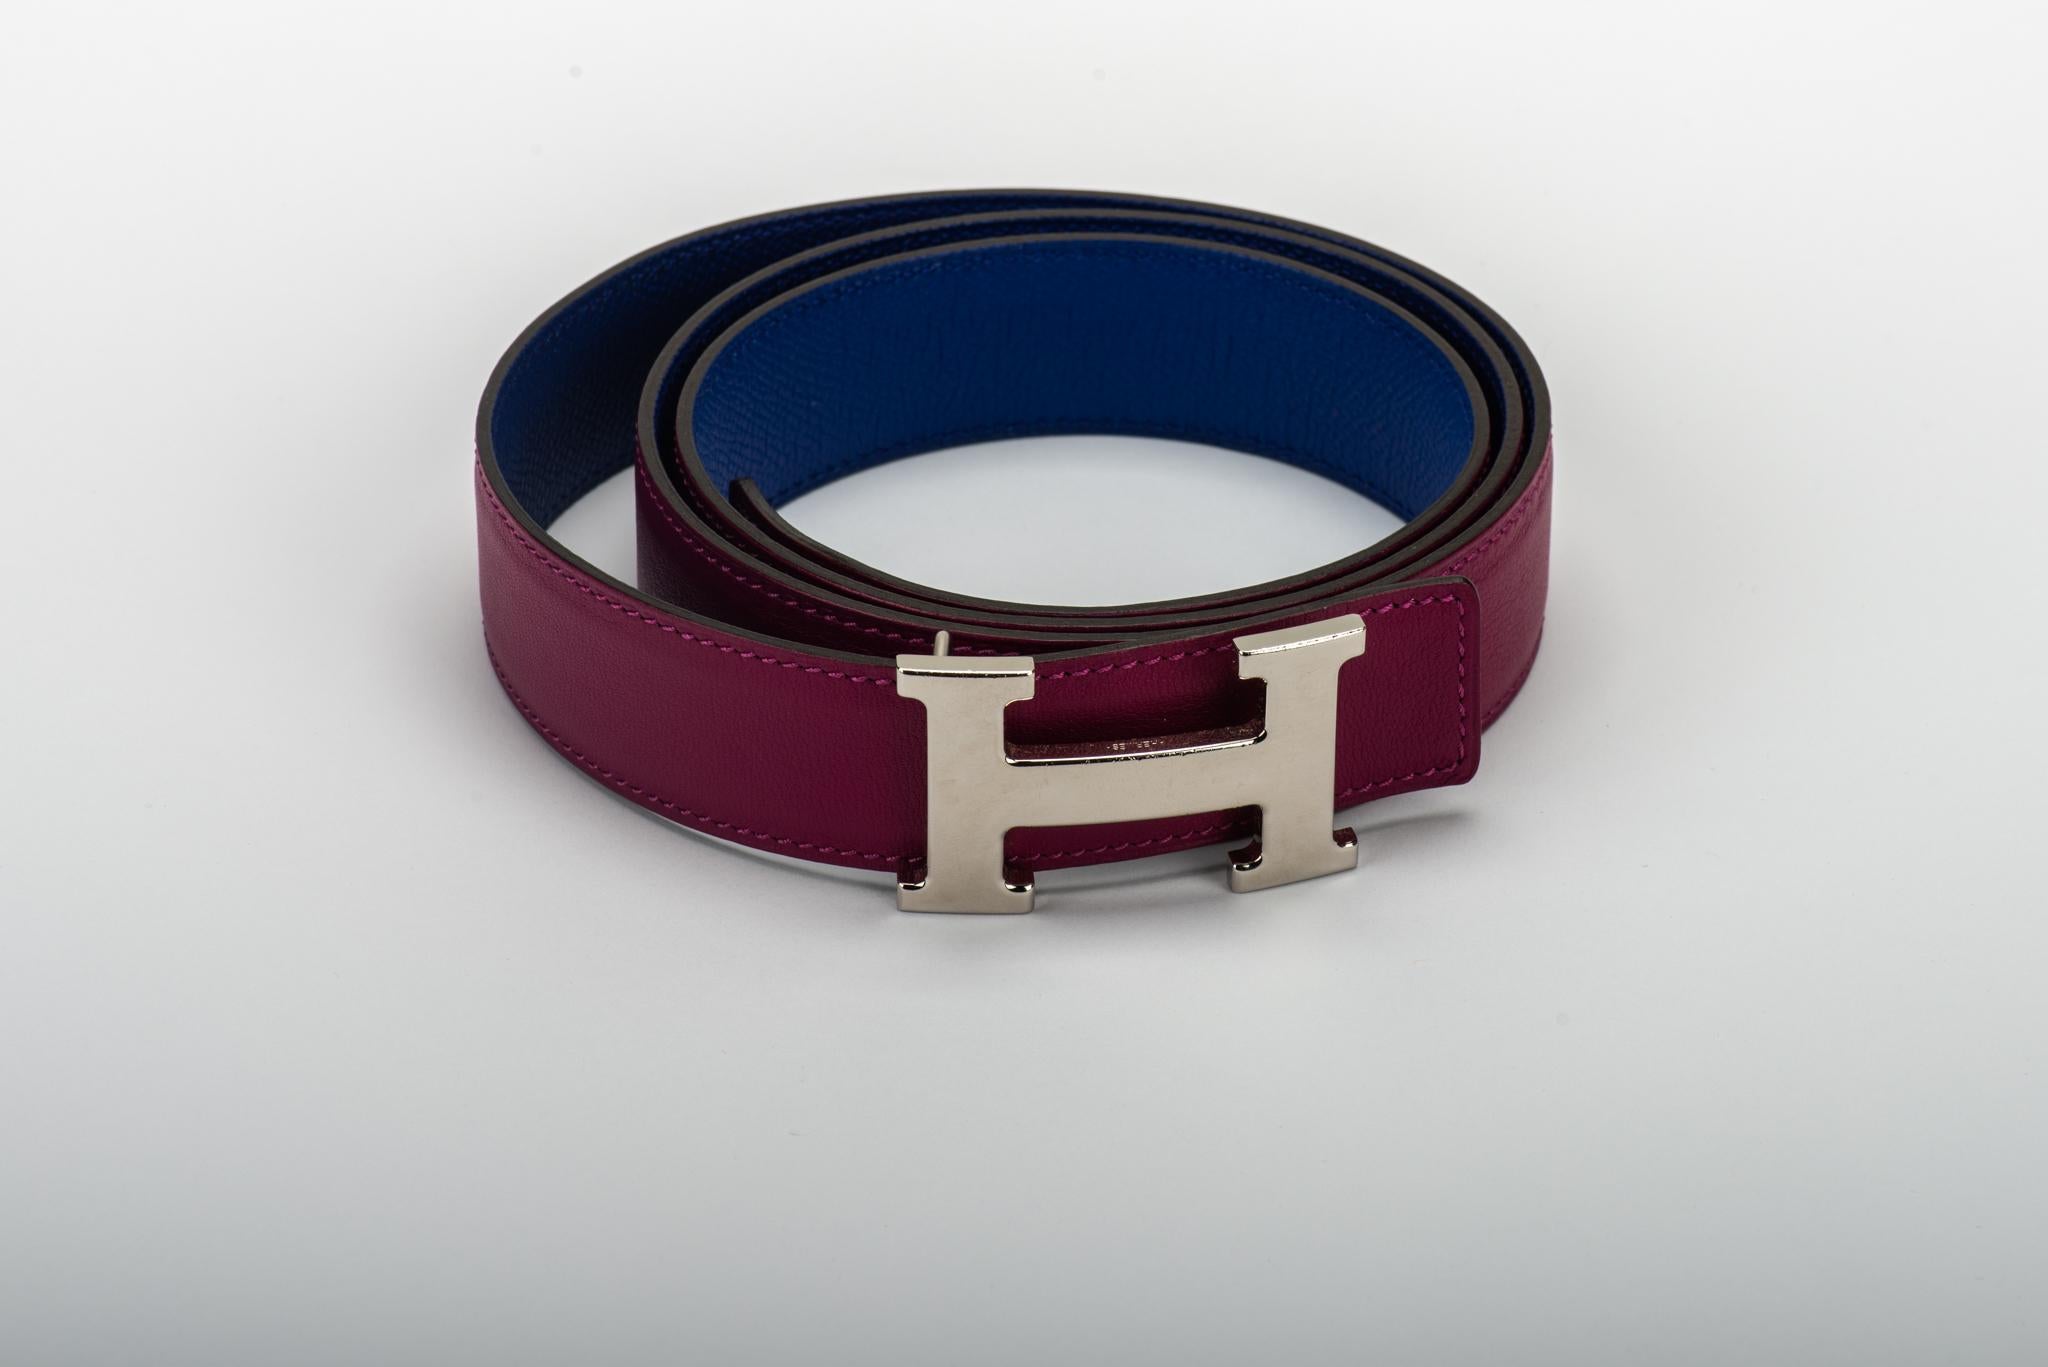 Hermès unisex reversible leather H belt. Ruby Epsom leather, purple Swift leather, and smooth palladium belt buckle combination. Size 110 cm. Date stamp R for 2014. Comes with original dust bag. Minor scuffs on leather and metal. Two holes have been